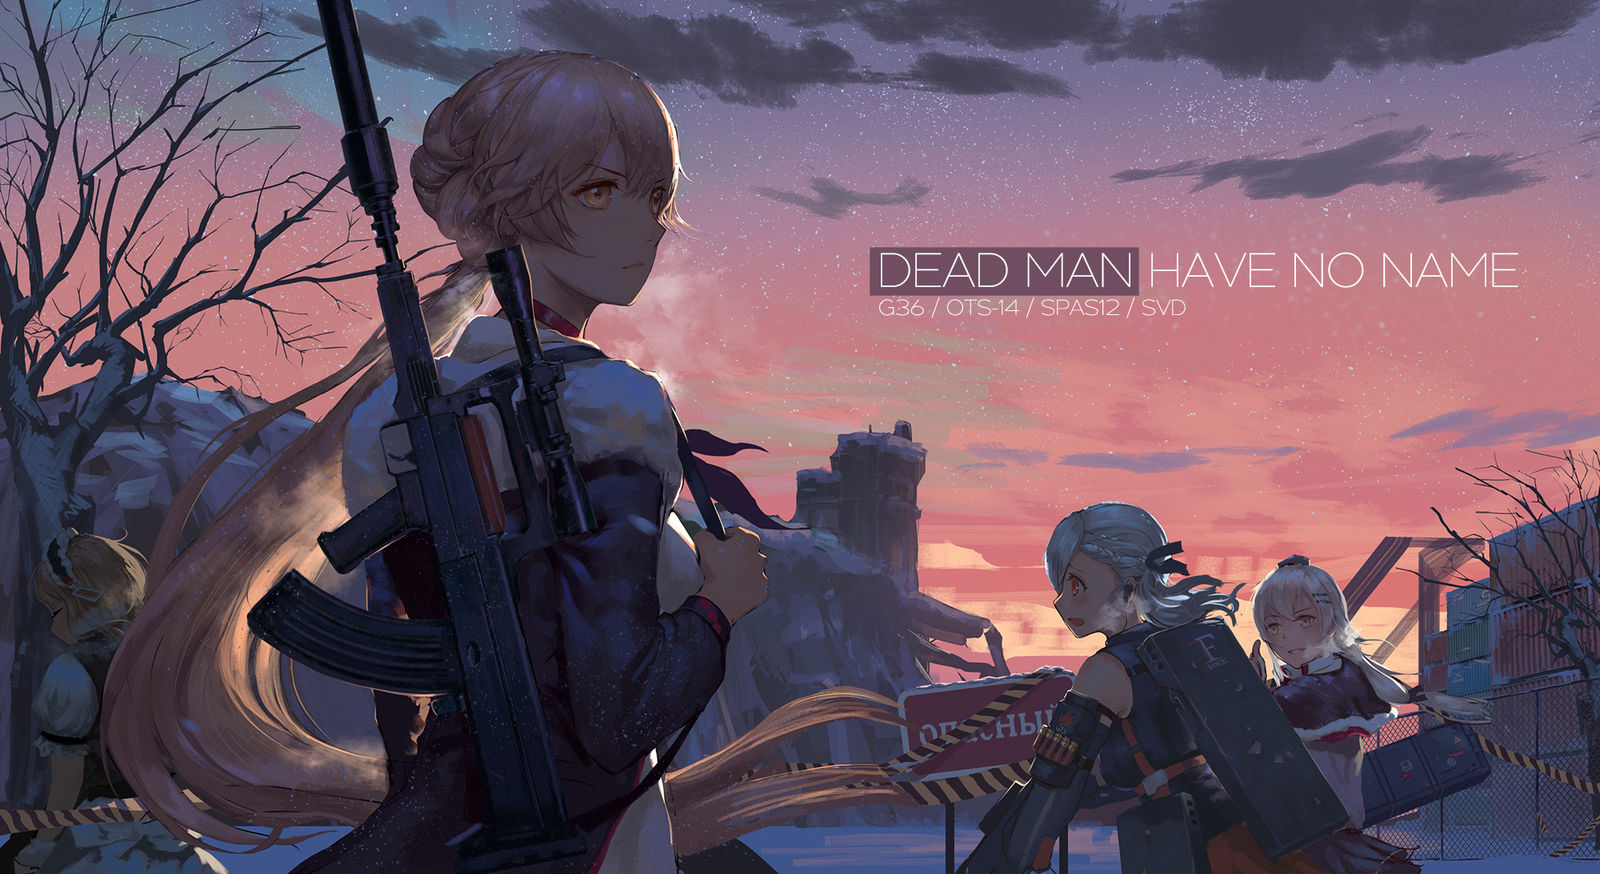 Dead man have no name